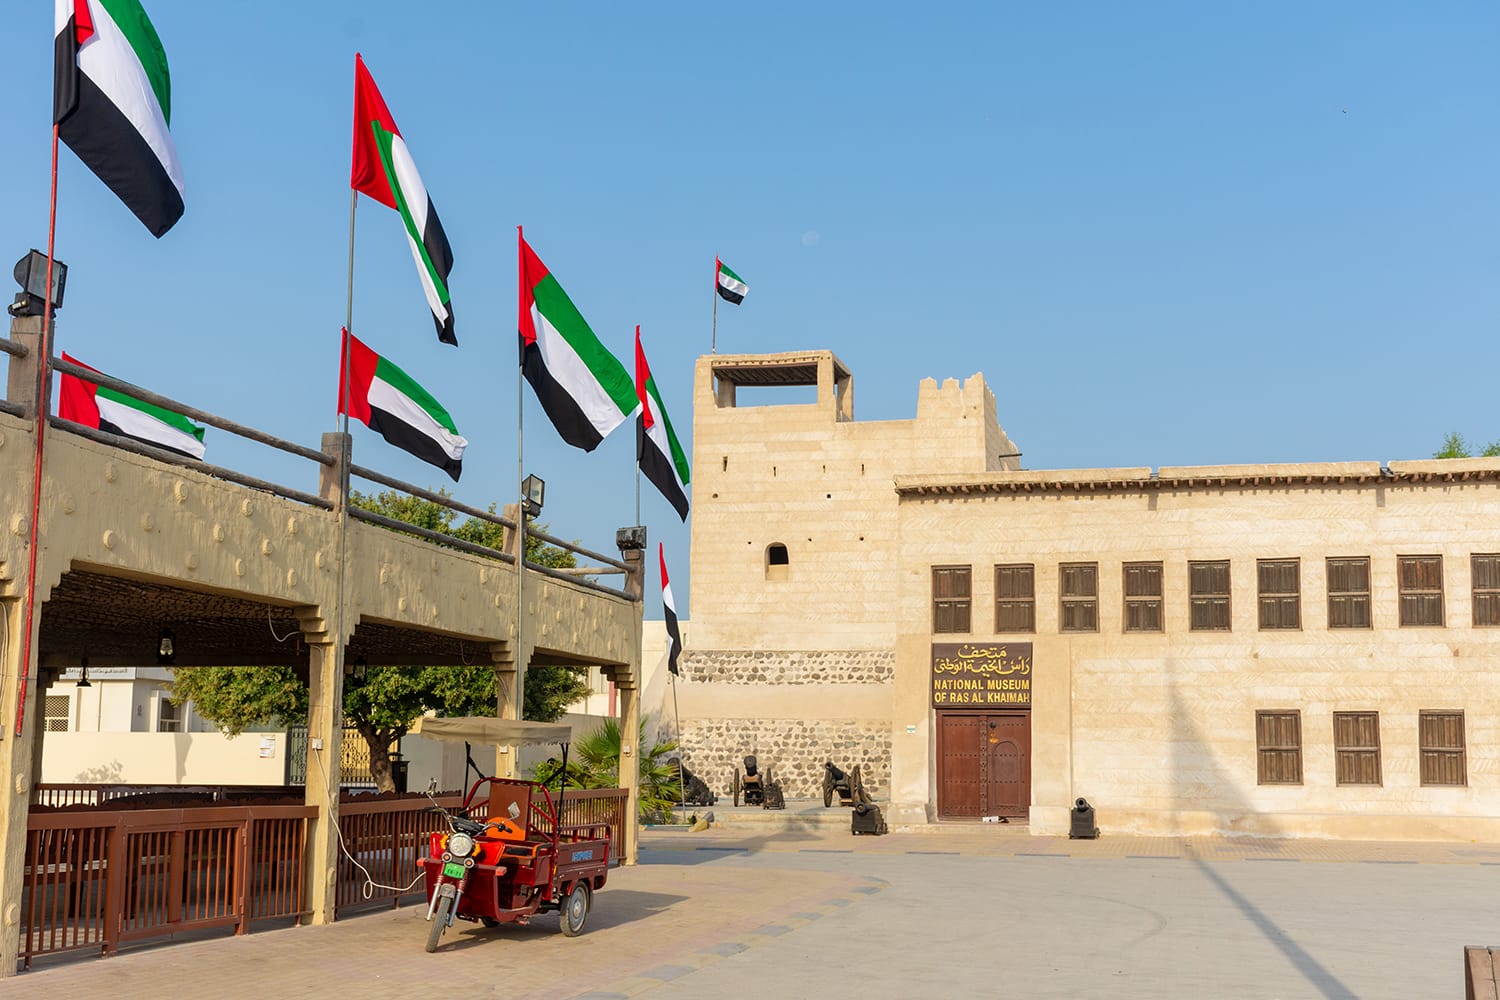 Entrance of the Ras al Khaimah Museum in the morning sun with flags blowing